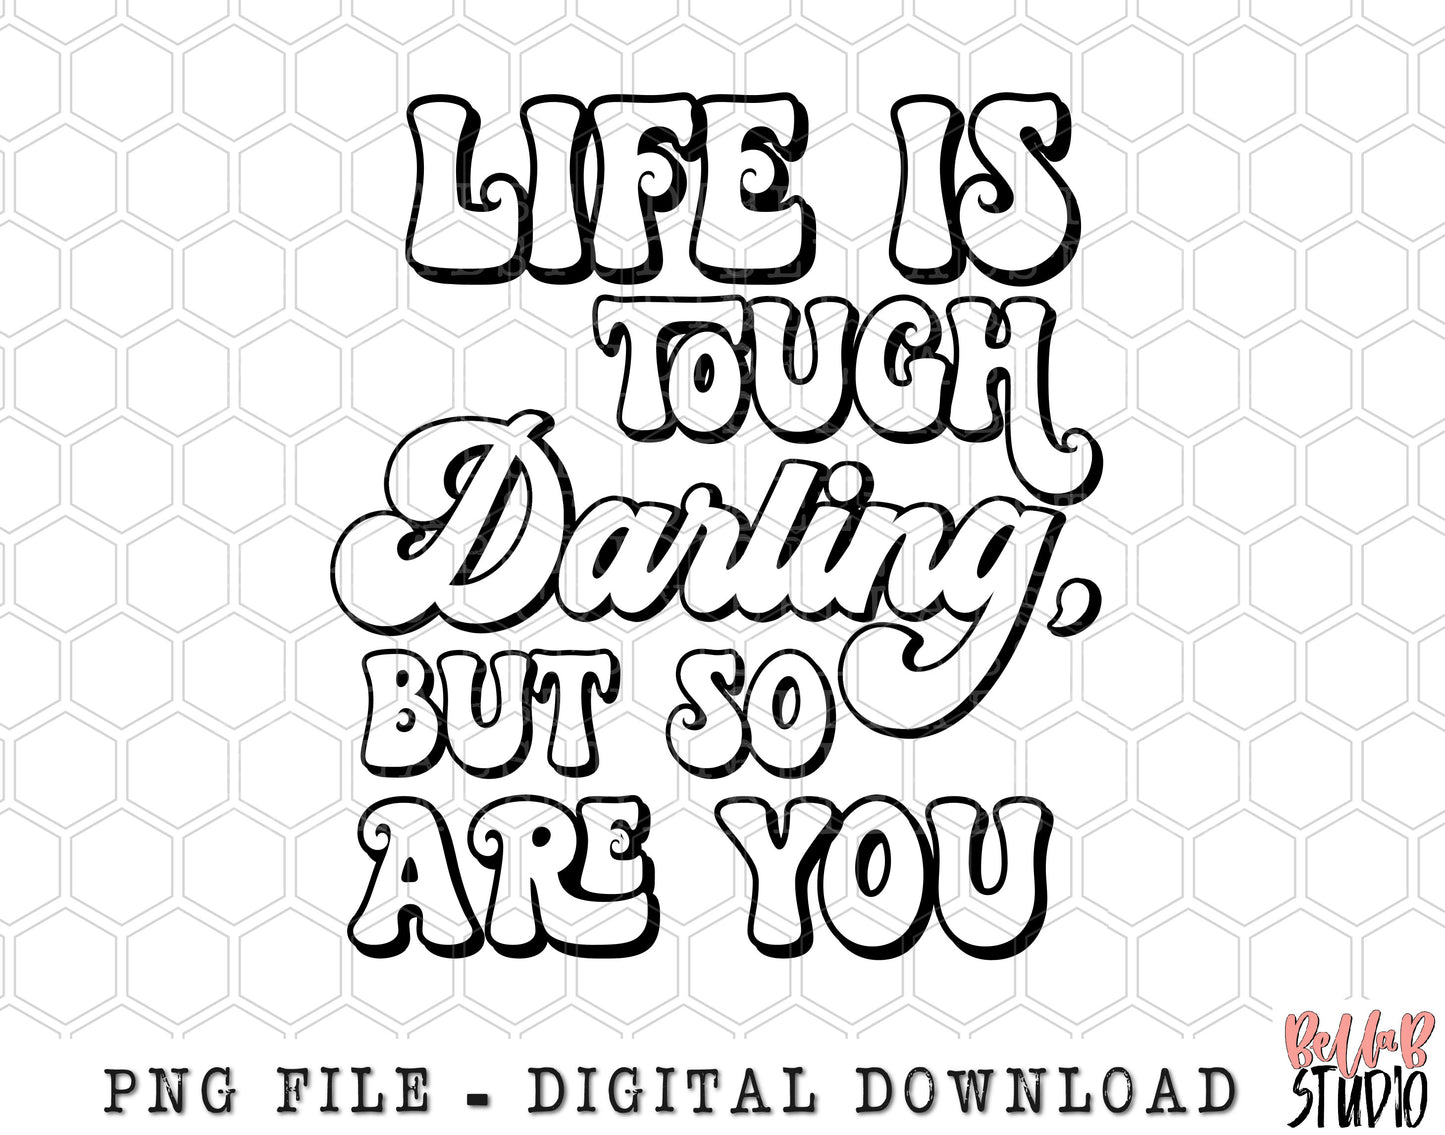 Life Is Tough Darling But So Are You PNG Sublimation Design